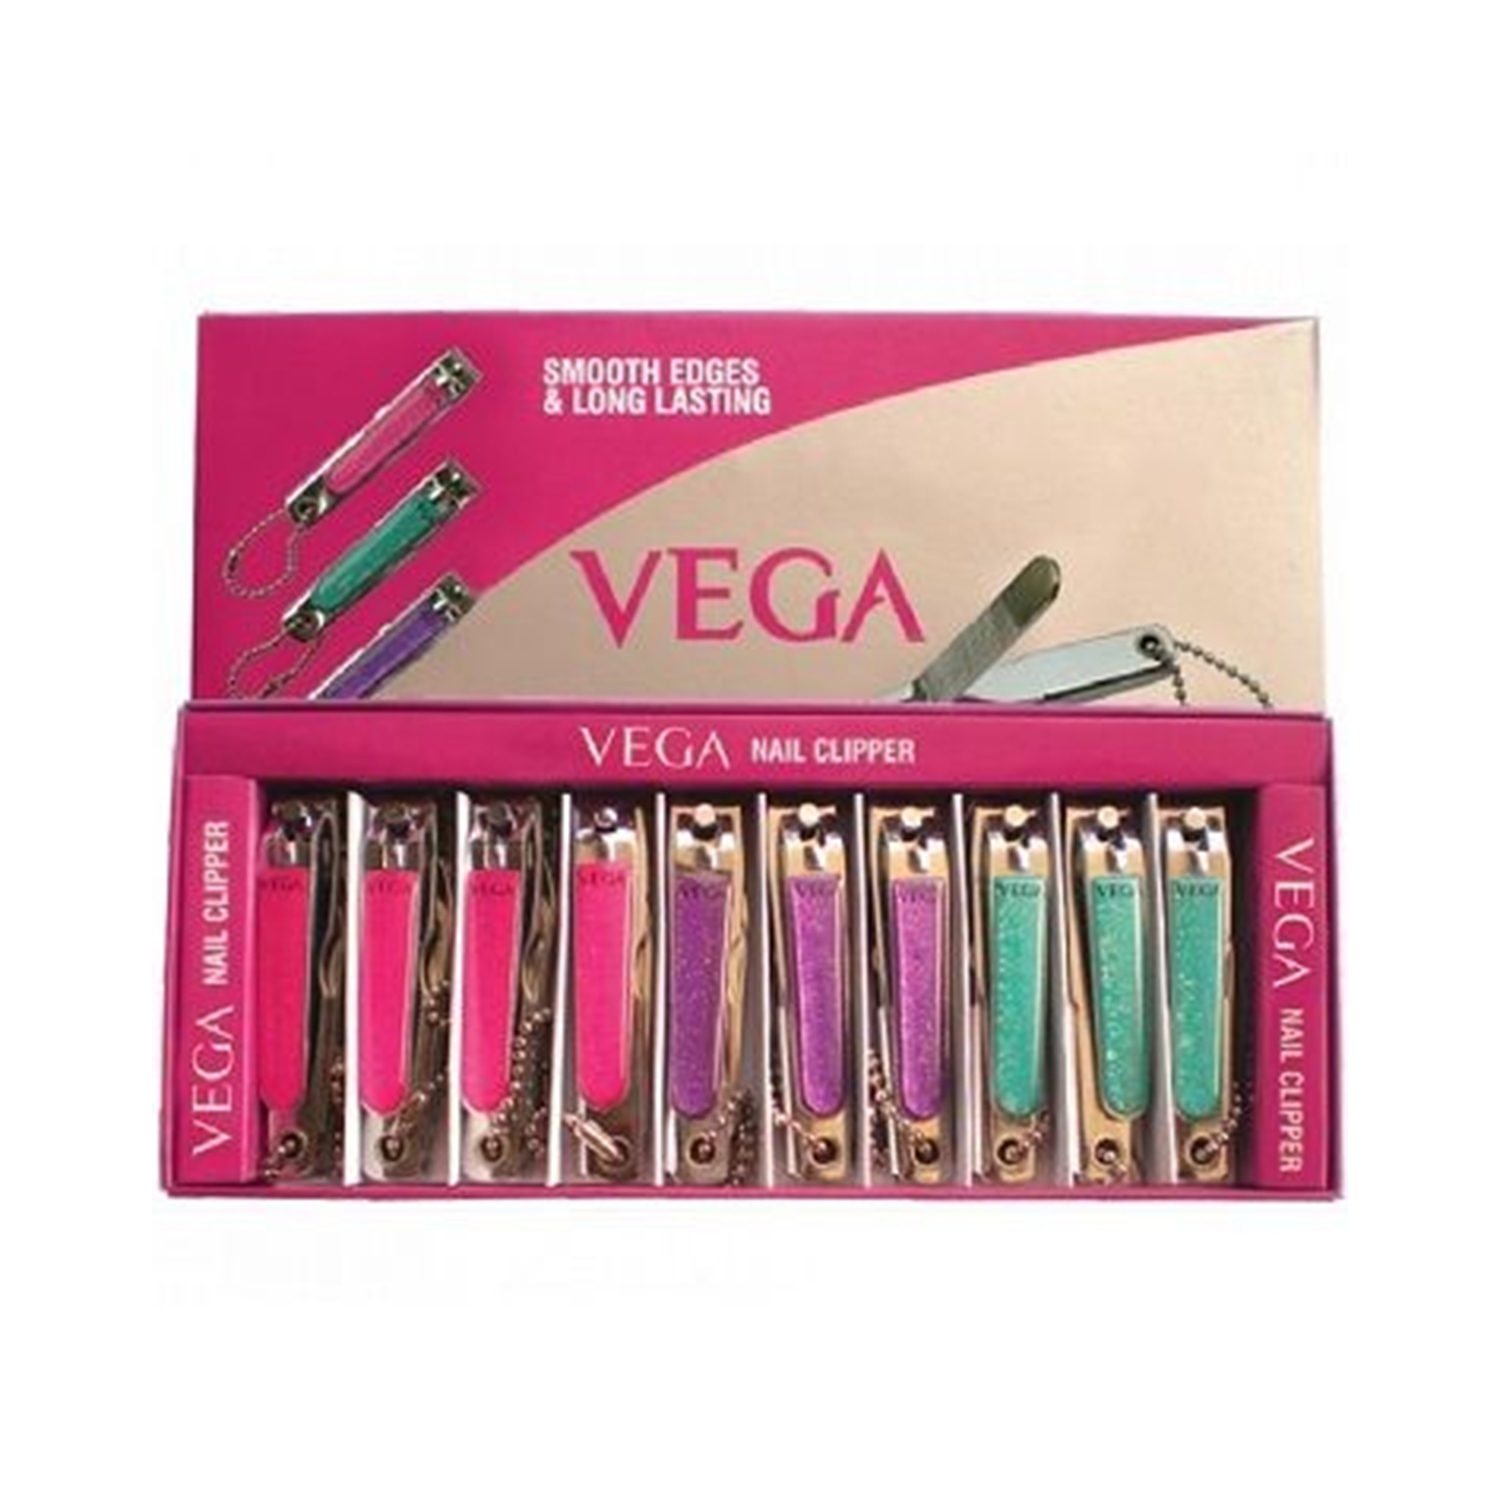 Buy Vega Small Nail Clipper Online at Low Prices in India - Amazon.in